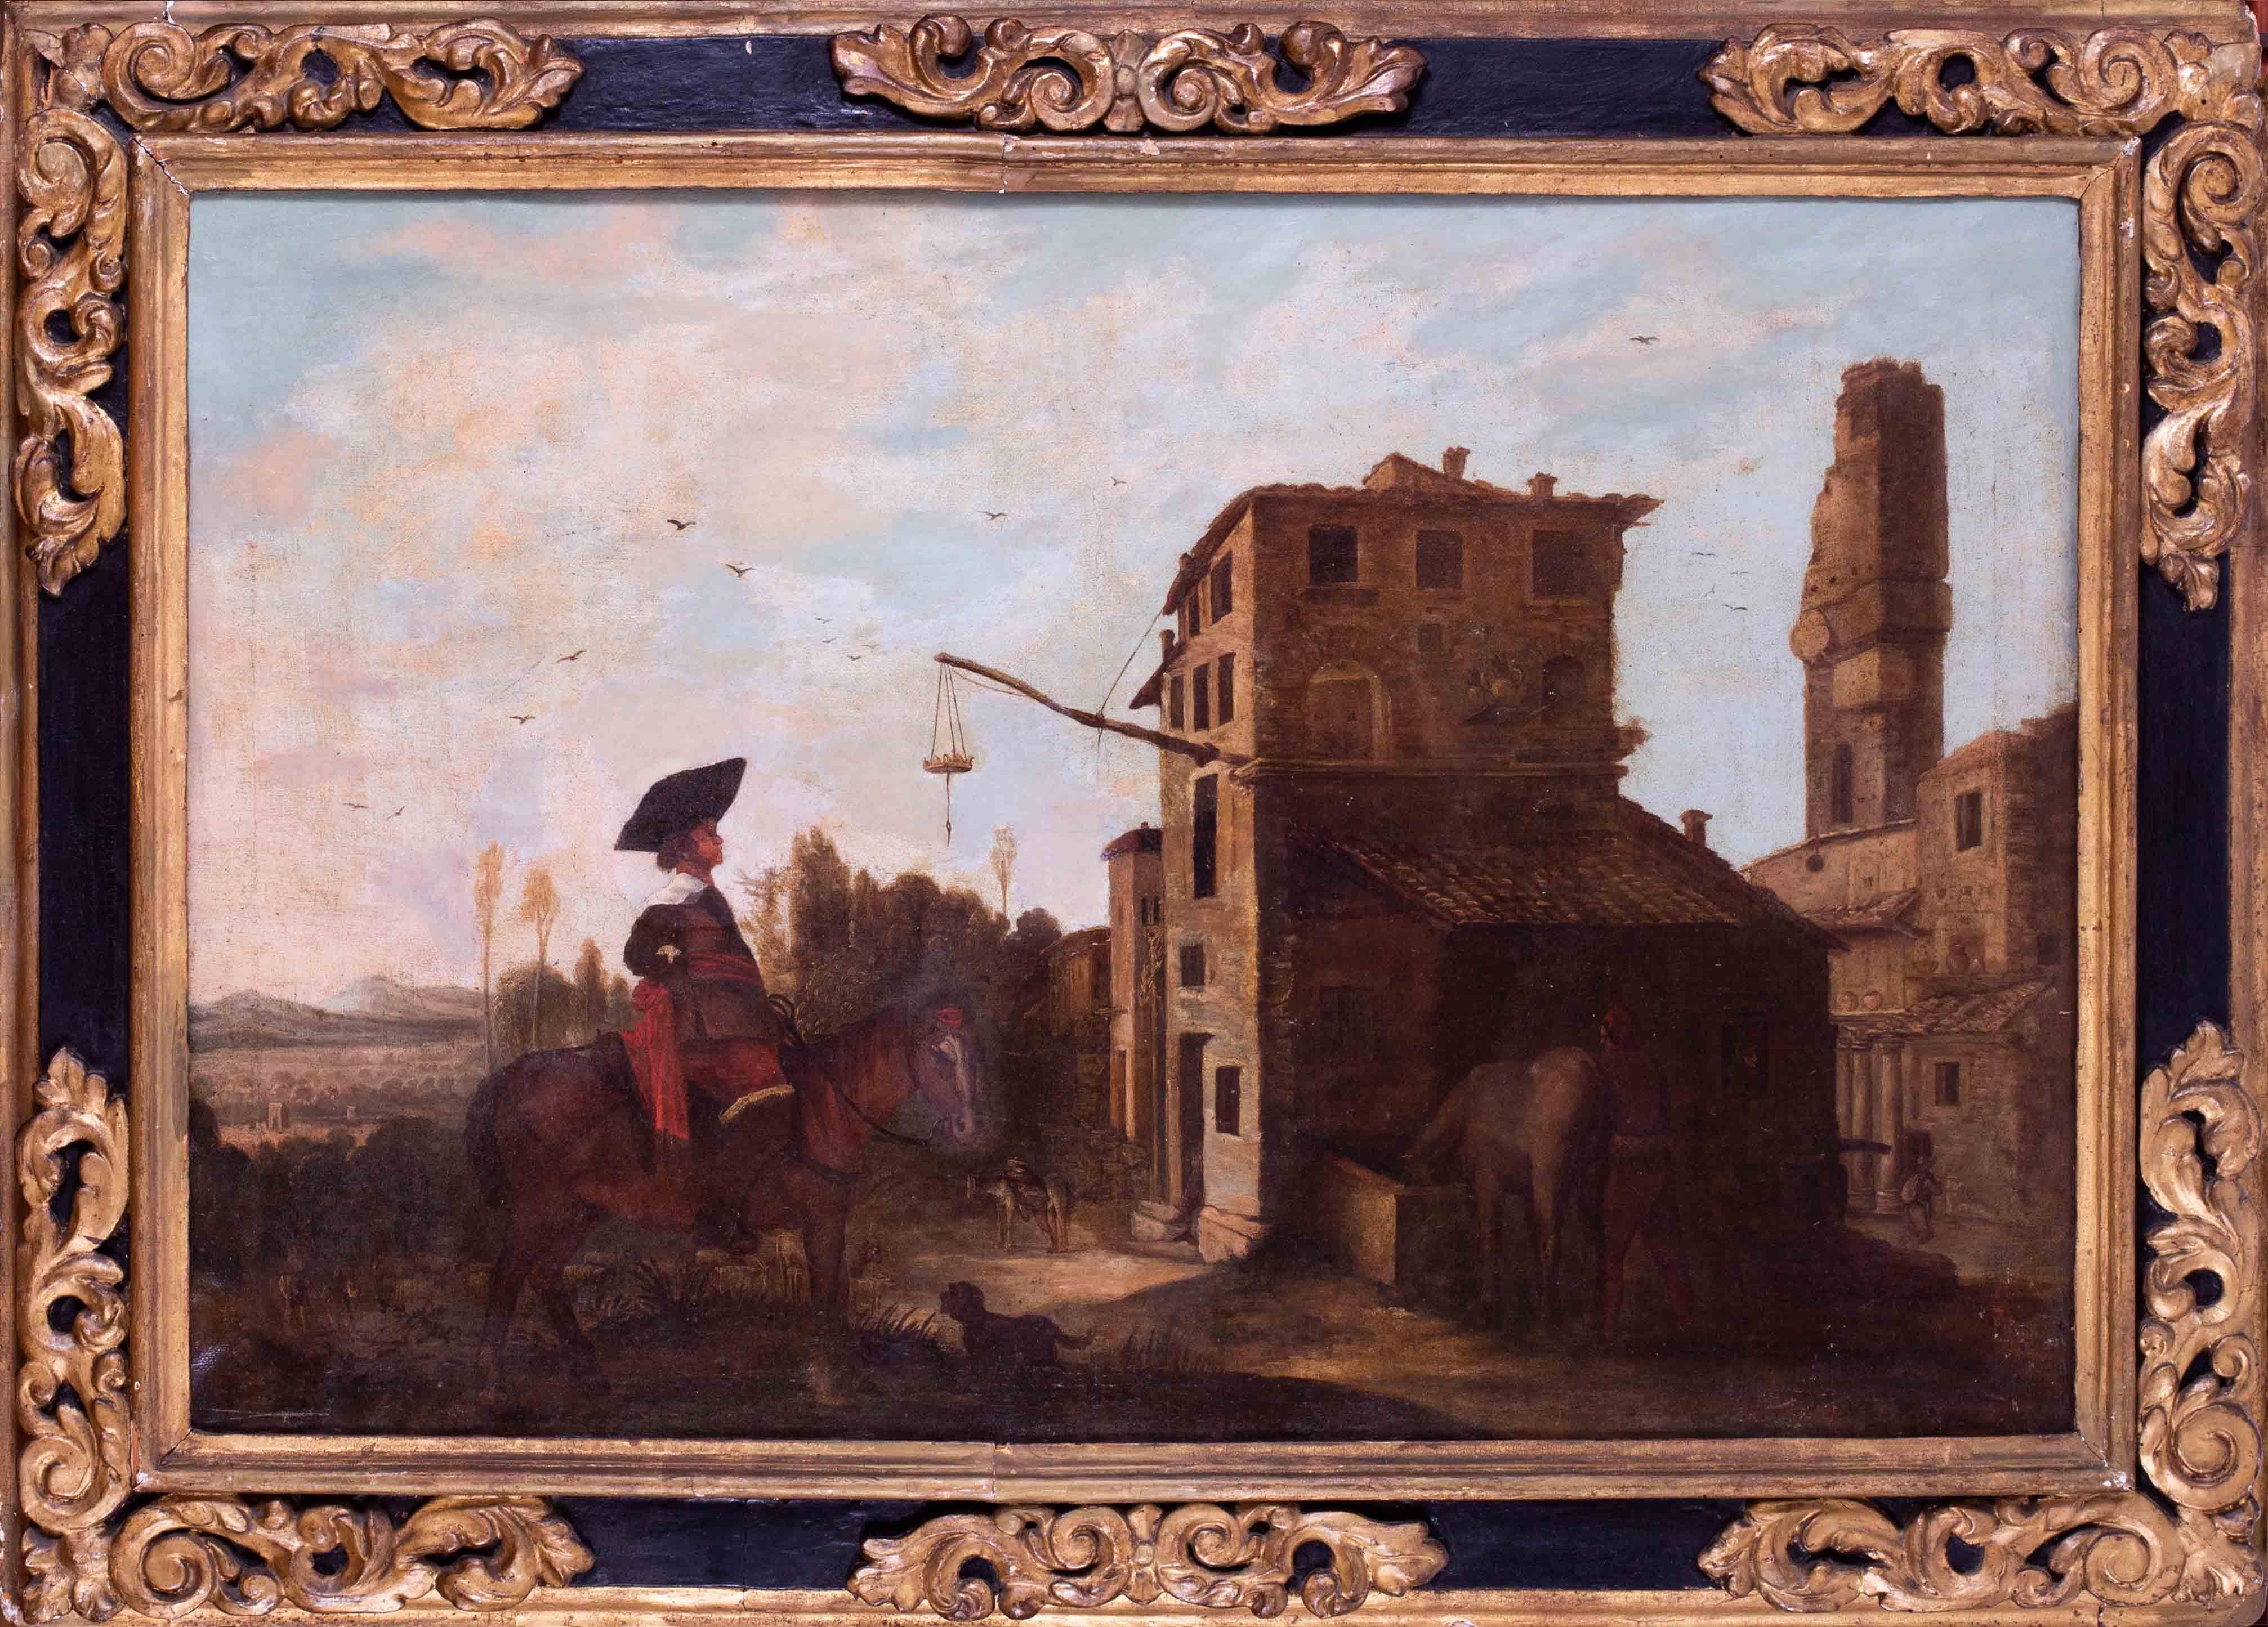 17th Century Spanish school oil painting of a soldier arriving at a village